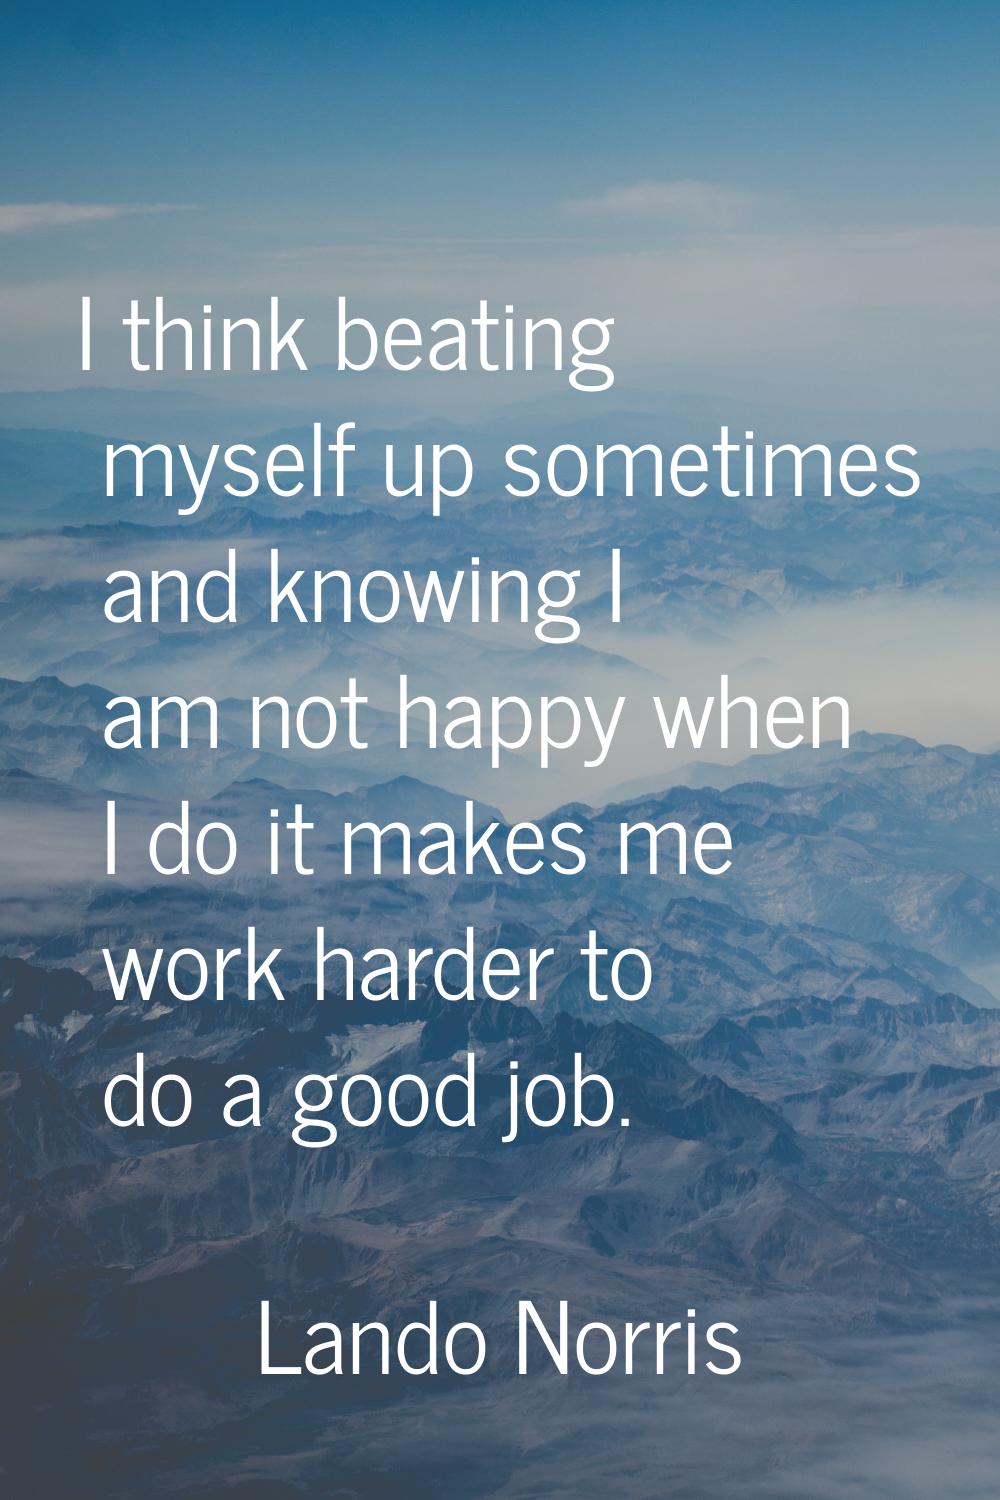 I think beating myself up sometimes and knowing I am not happy when I do it makes me work harder to